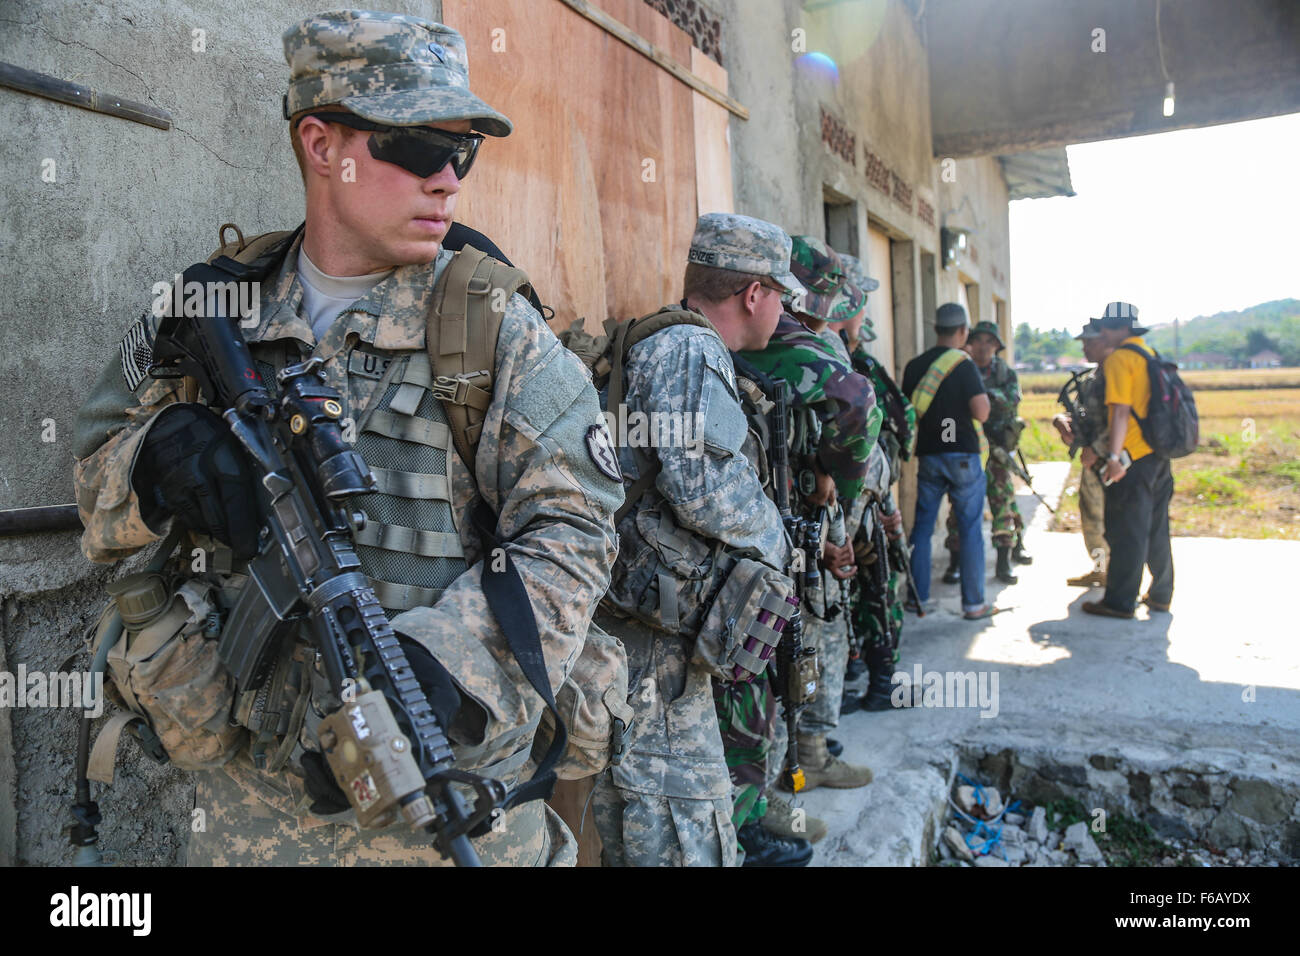 U.S. Army Spc. Conor Bonaventure, an Infantryman from Bravo Company 2-27th Infantry Regiment 3rd Infantry Brigade 25th Infantry Division, stands in the position of rear security that is preparing to search a house alongside Indonesian Soldiers from 1st Infantry Division of Kostrad during Garuda Shield, Pacific Pathways 2015 at Cibenda, West Java, Indonesia, on Aug. 21, 2015.  Garuda Shield is a regularly scheduled bilateral exercise sponsored by U.S. Army-Pacific, hosted annually by the Tentara Nasional Indonesia Army to promote regional security and cooperation.  (U.S. Army Photo by Spc. Mich Stock Photo